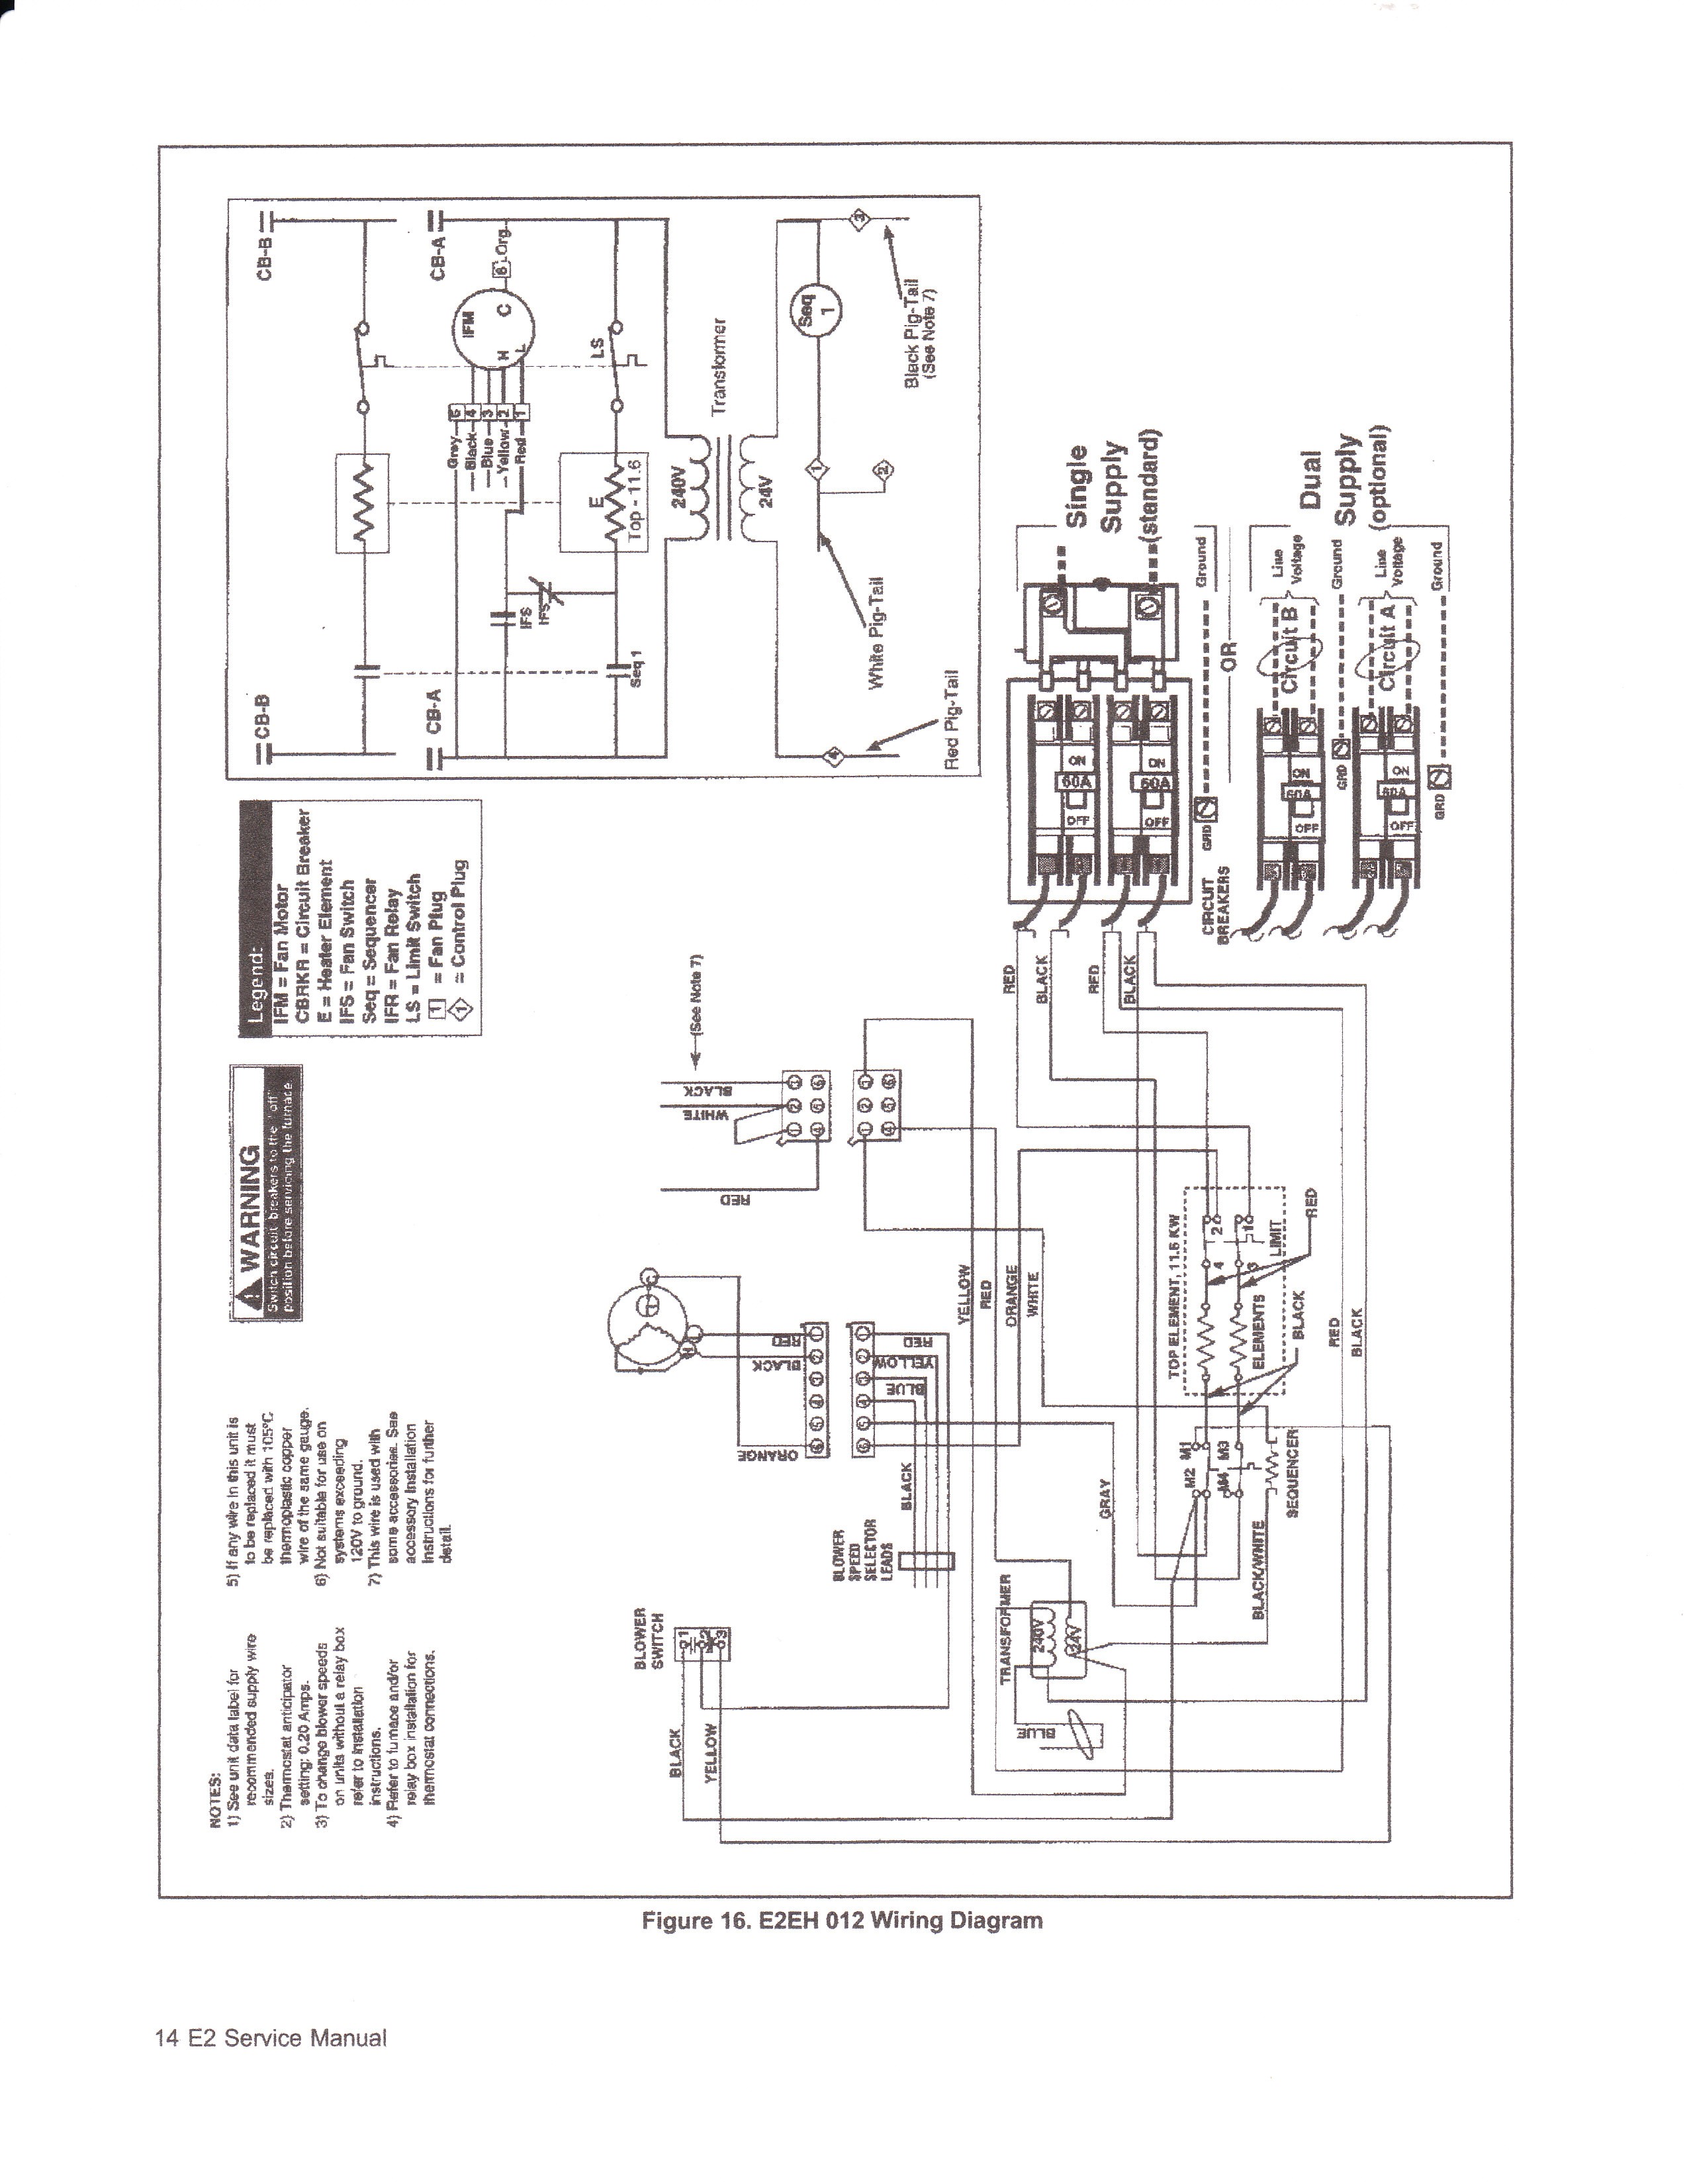 Lovely Intertherm Electric Furnace Wiring Diagram 18 For Wiring Diagram For Aprilaire 700 with Intertherm Electric